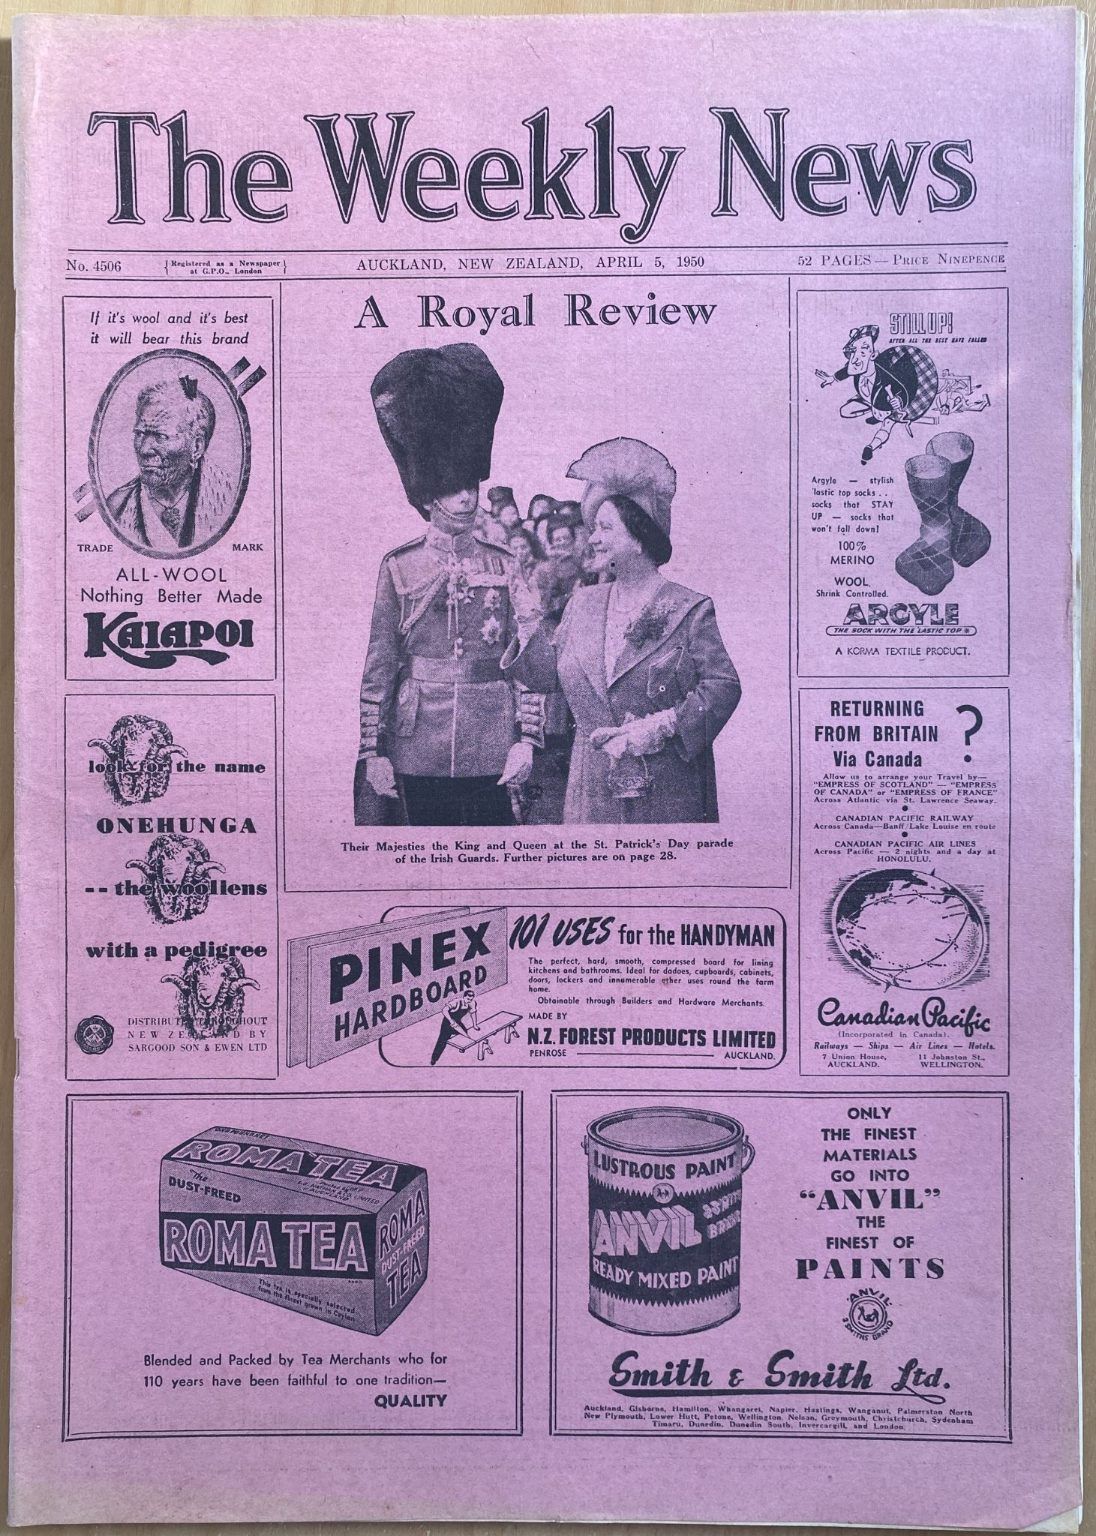 OLD NEWSPAPER: The Weekly News, No. 4506, 5 April 1950